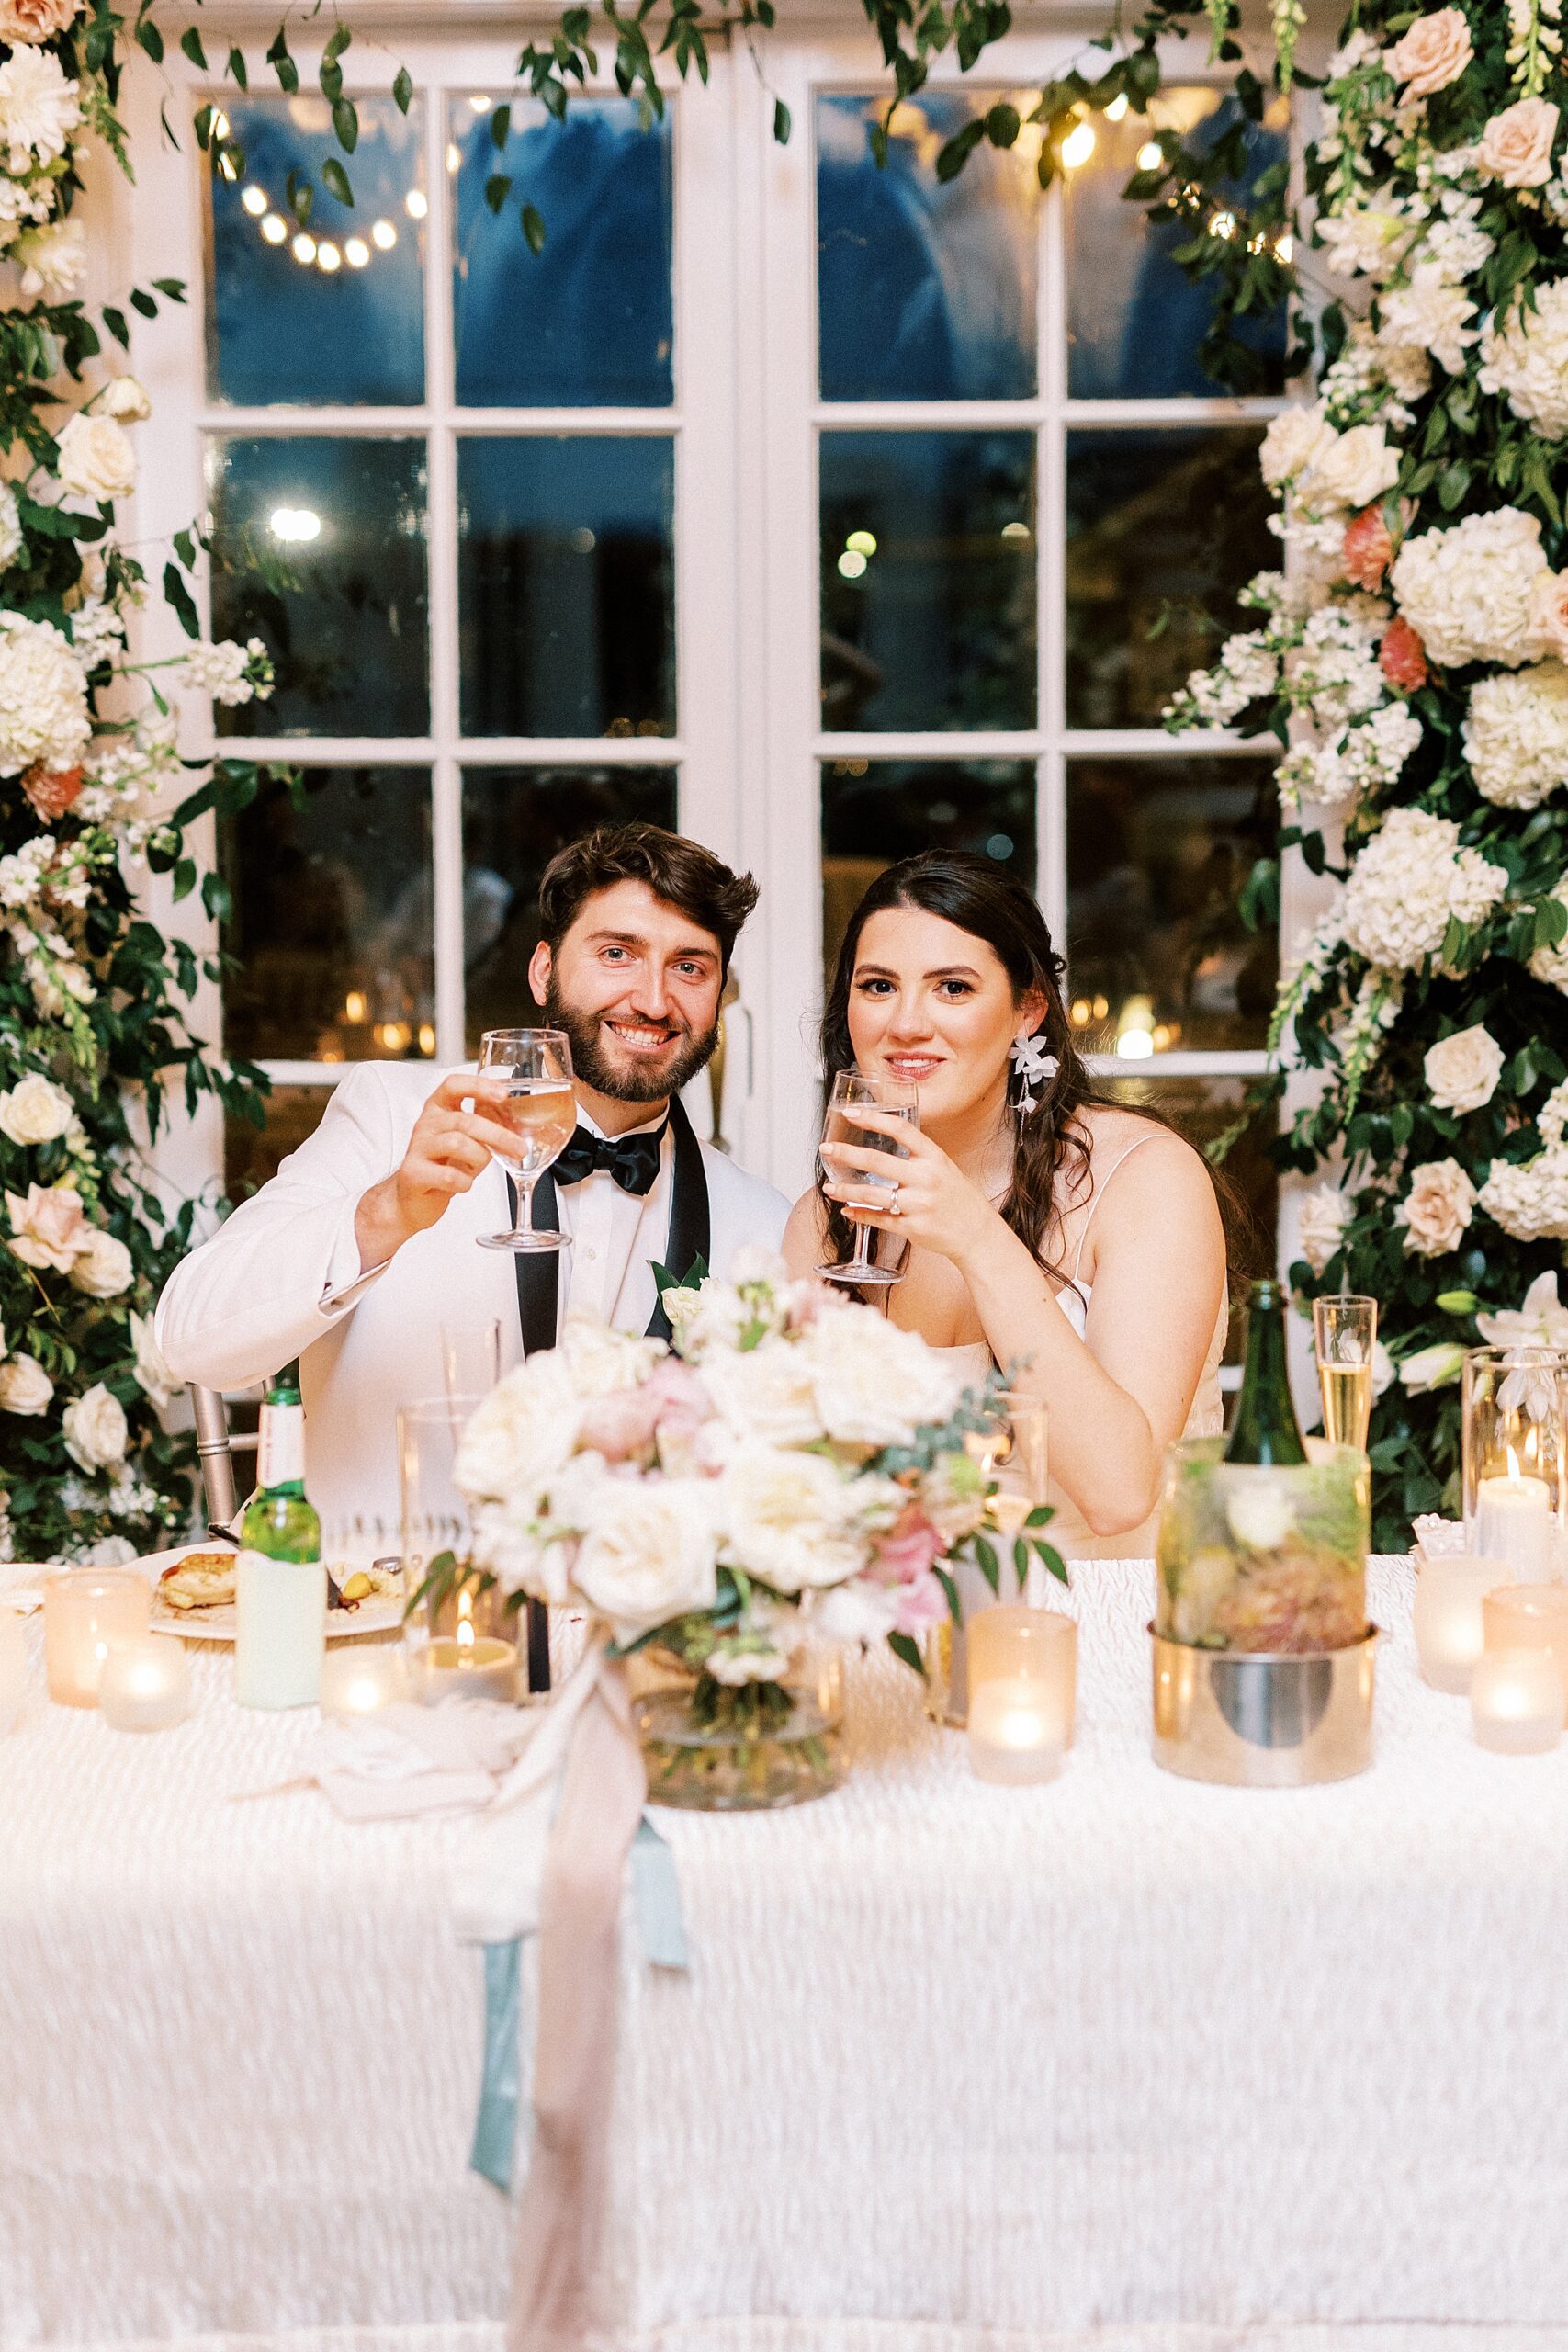 newlyweds lift drinks during toast for NC wedding reception 